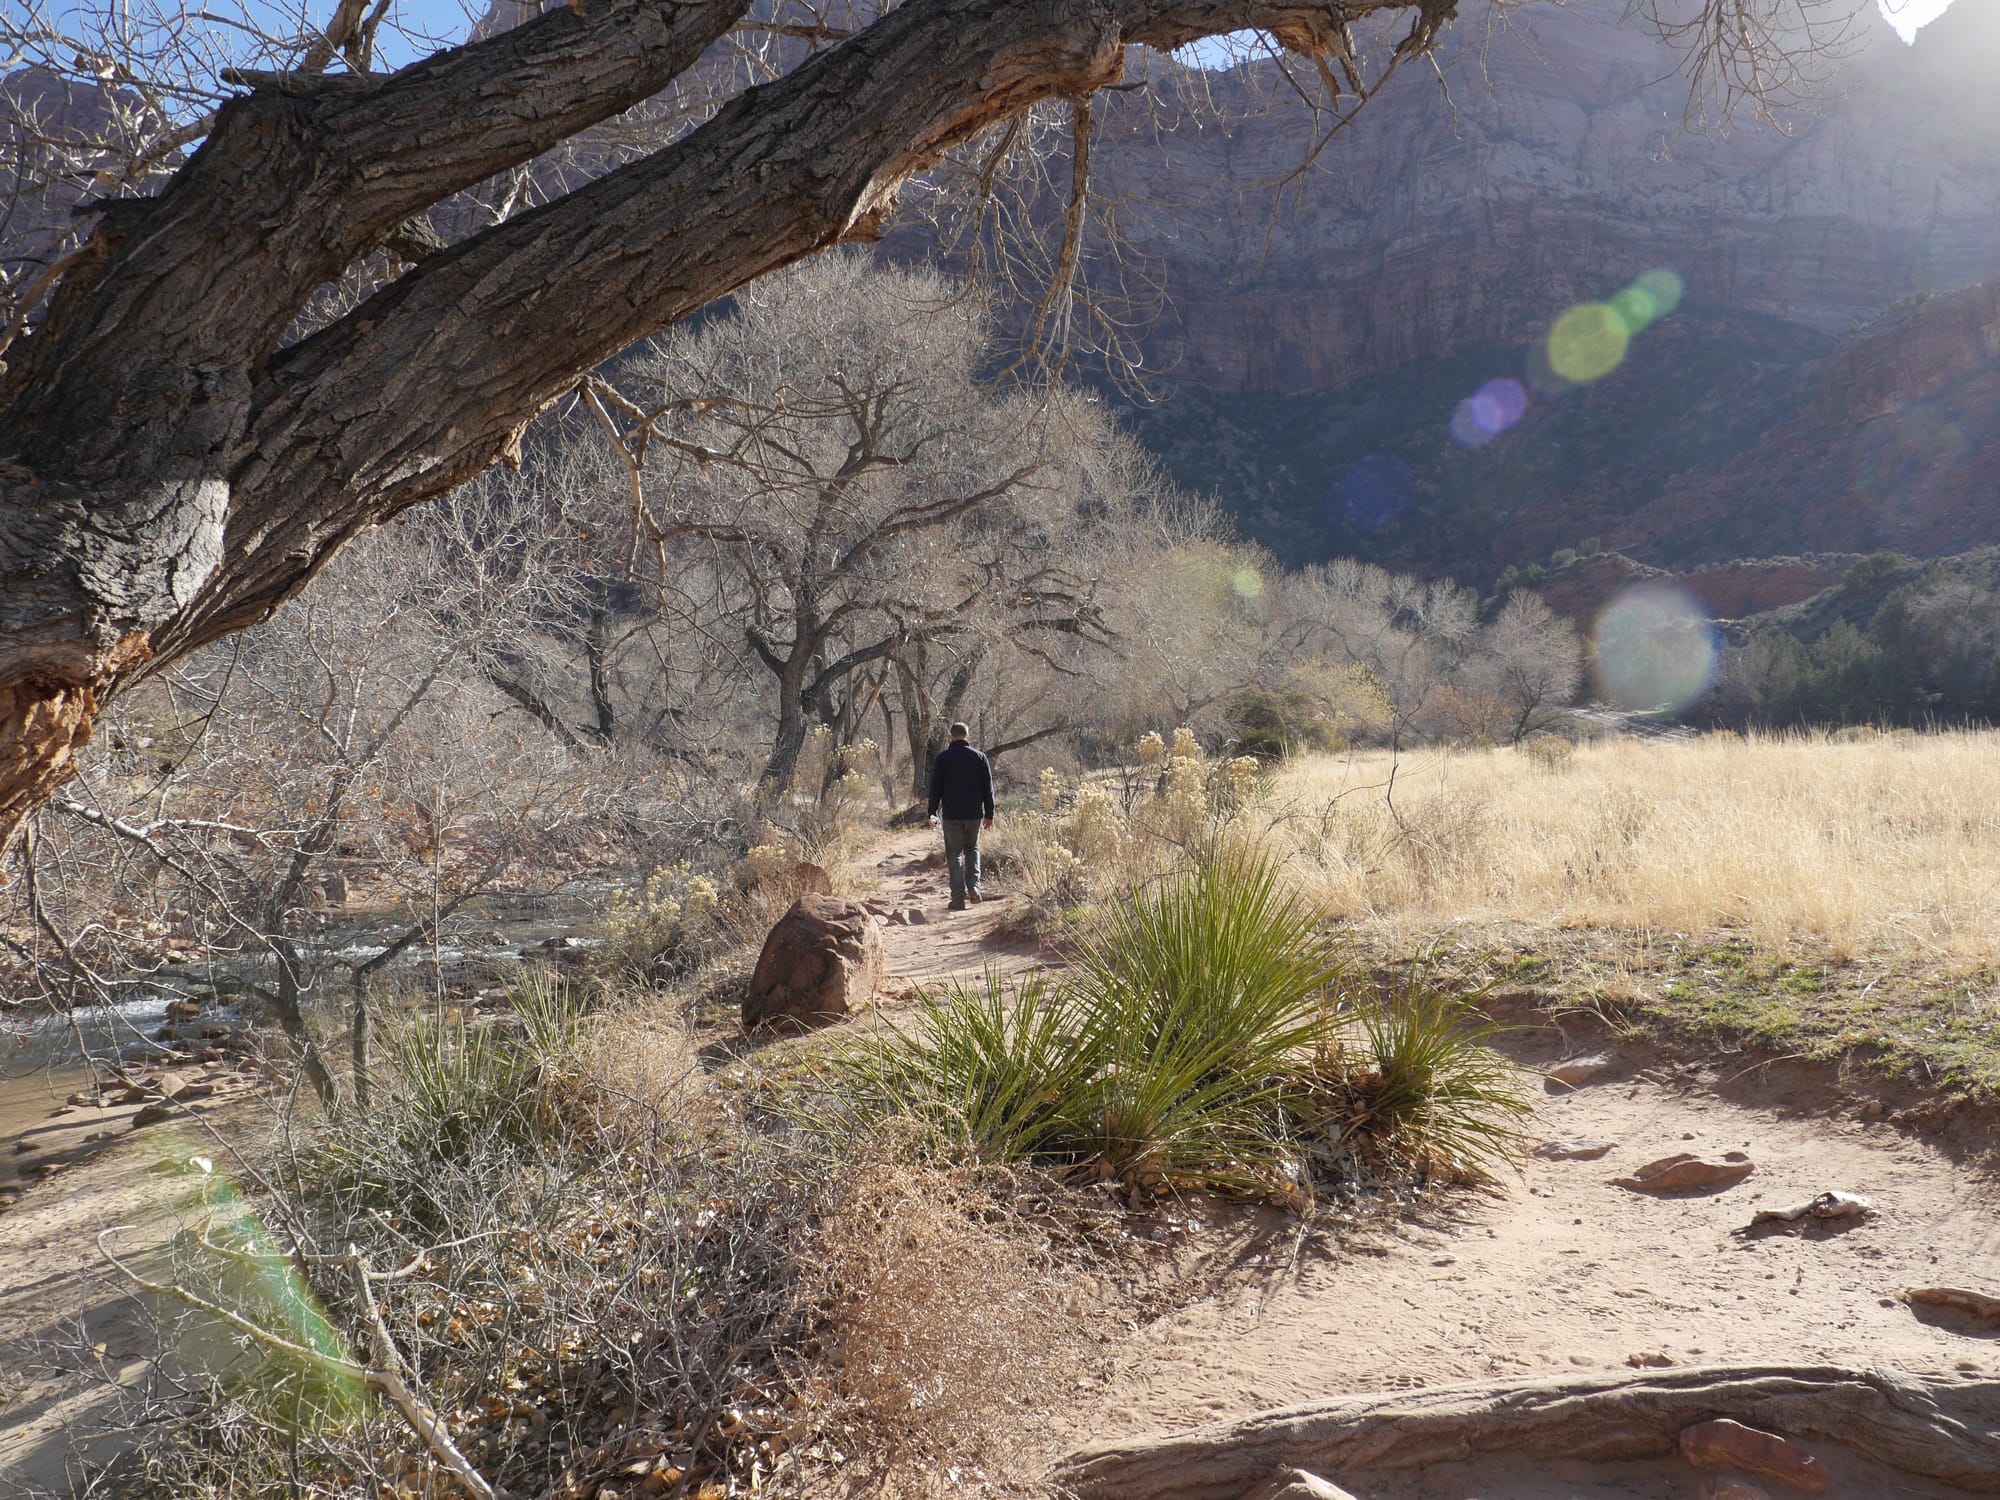 Photo by Author — early morning, heading out on the Watchman Trail